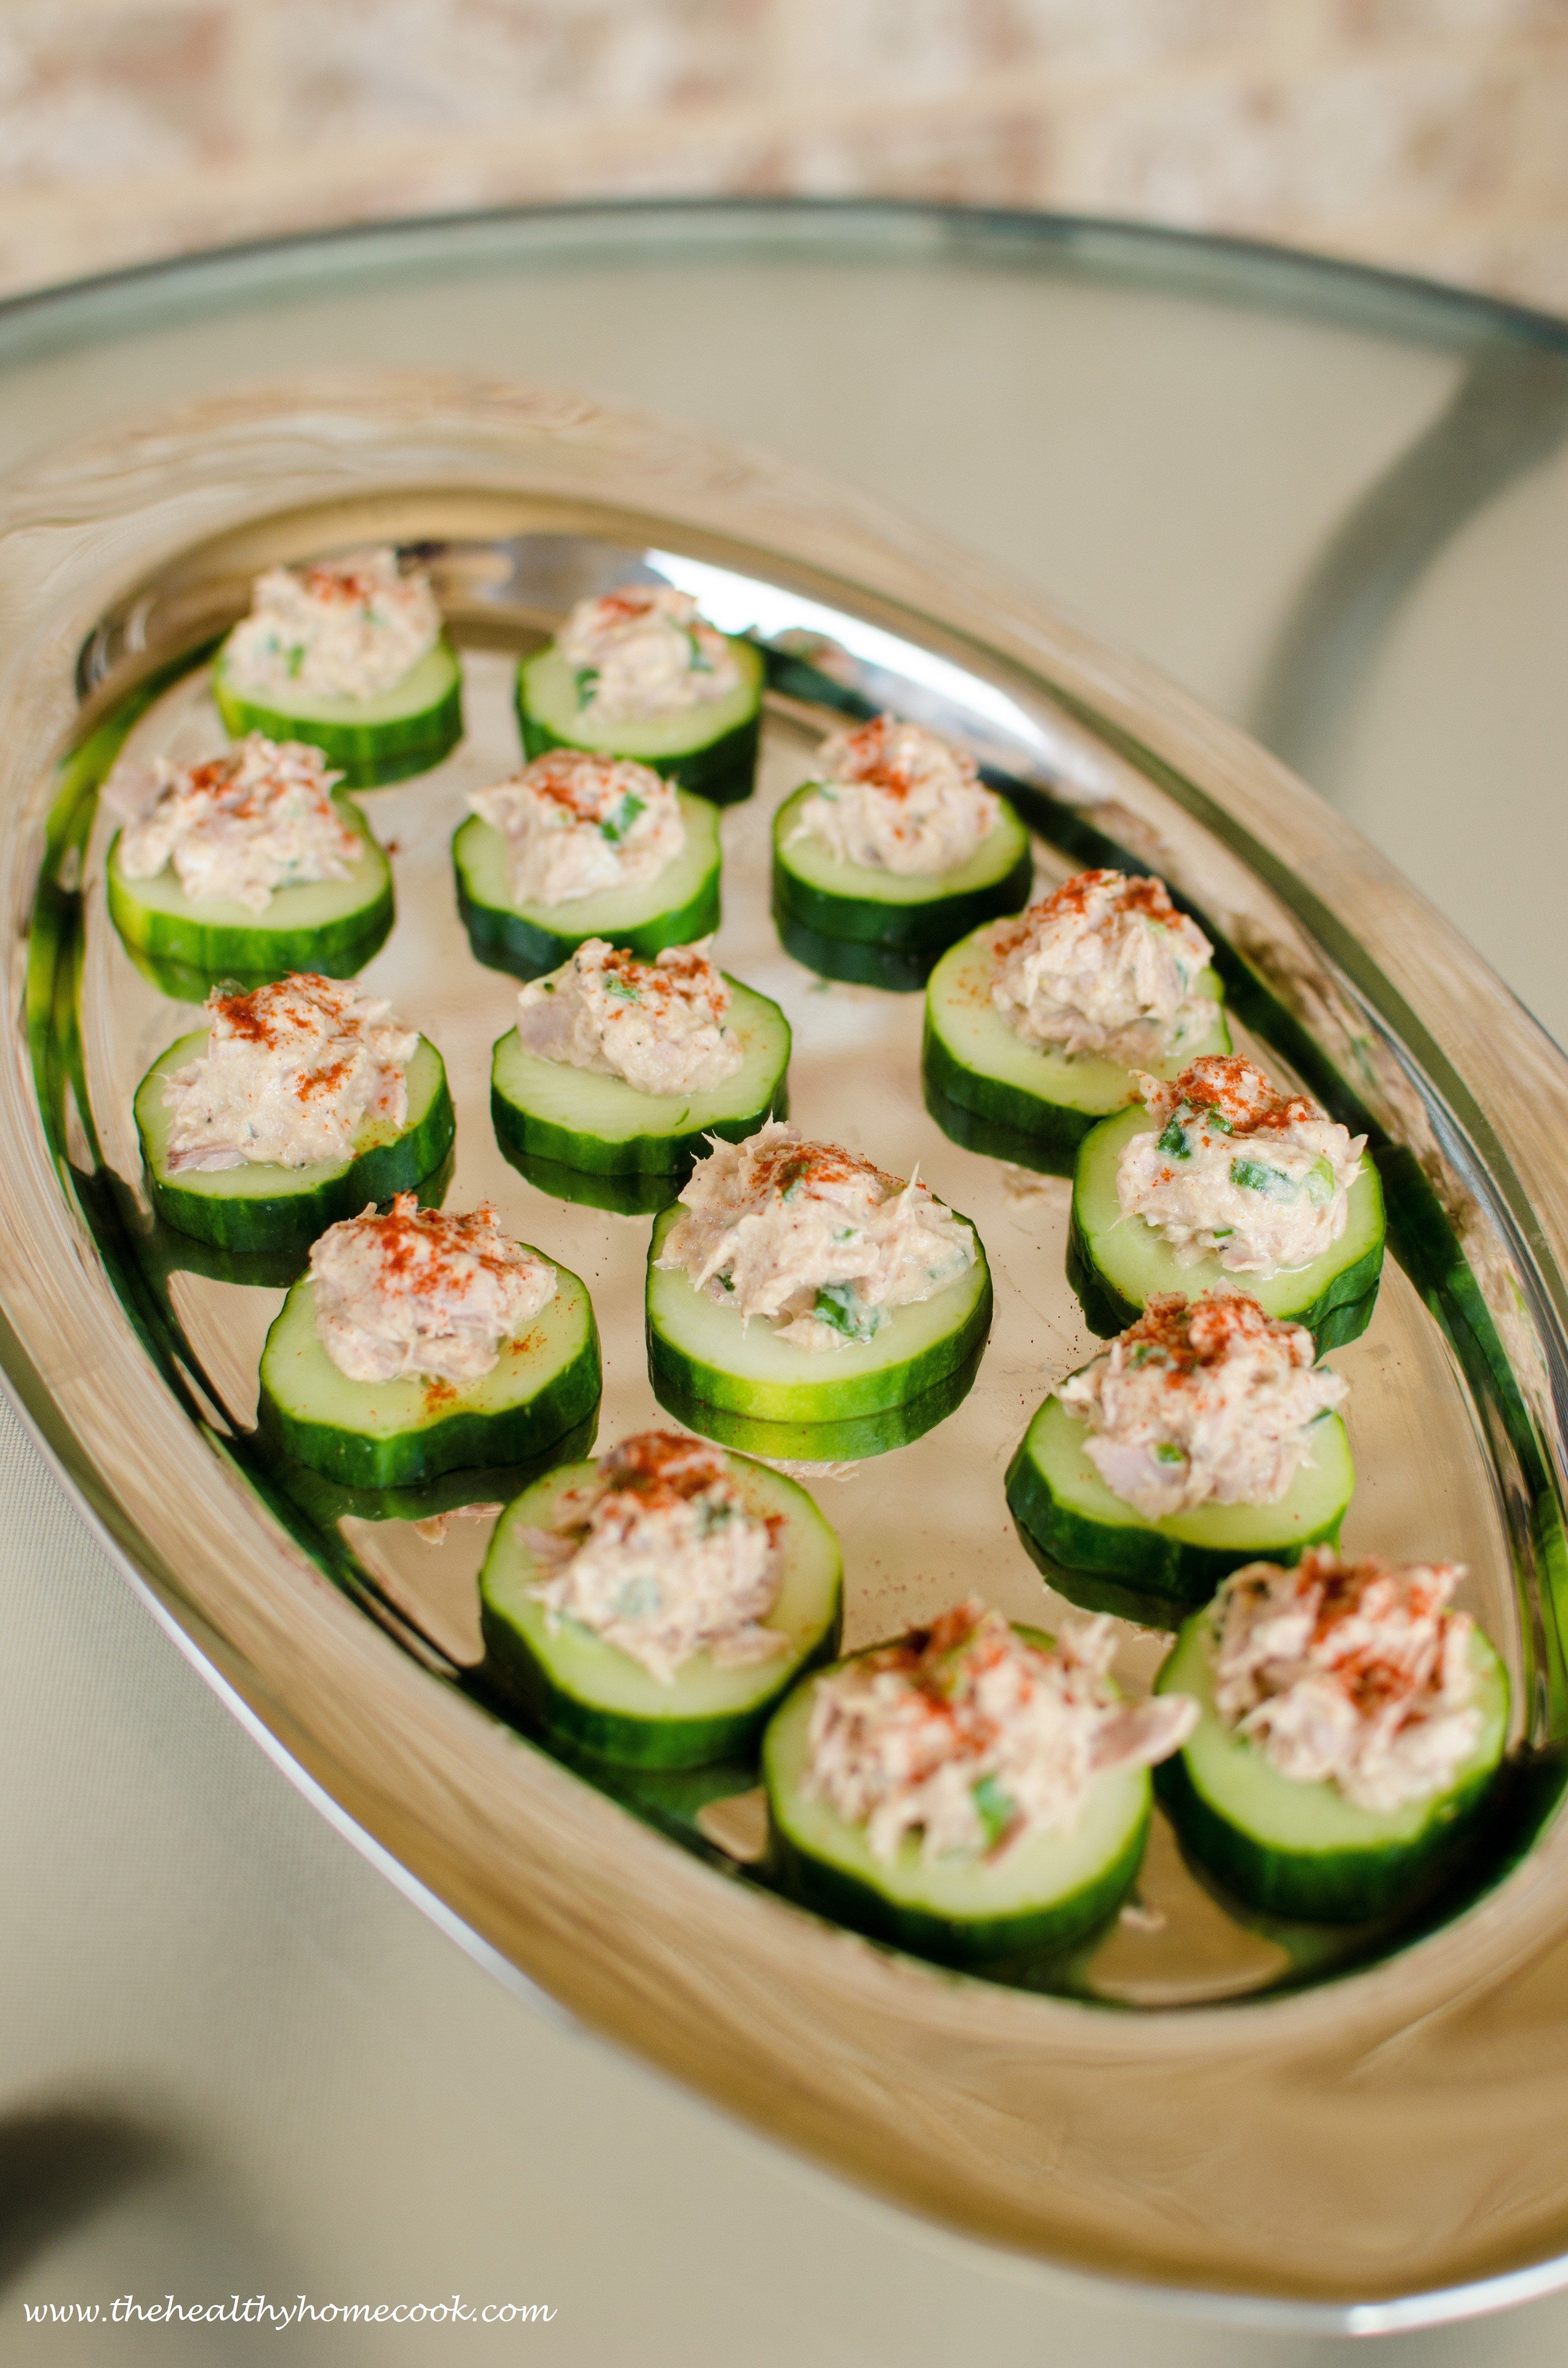 Healthy Appetizers For A Crowd
 Cucumber Bites with Tuna – The Healthy Home Cook